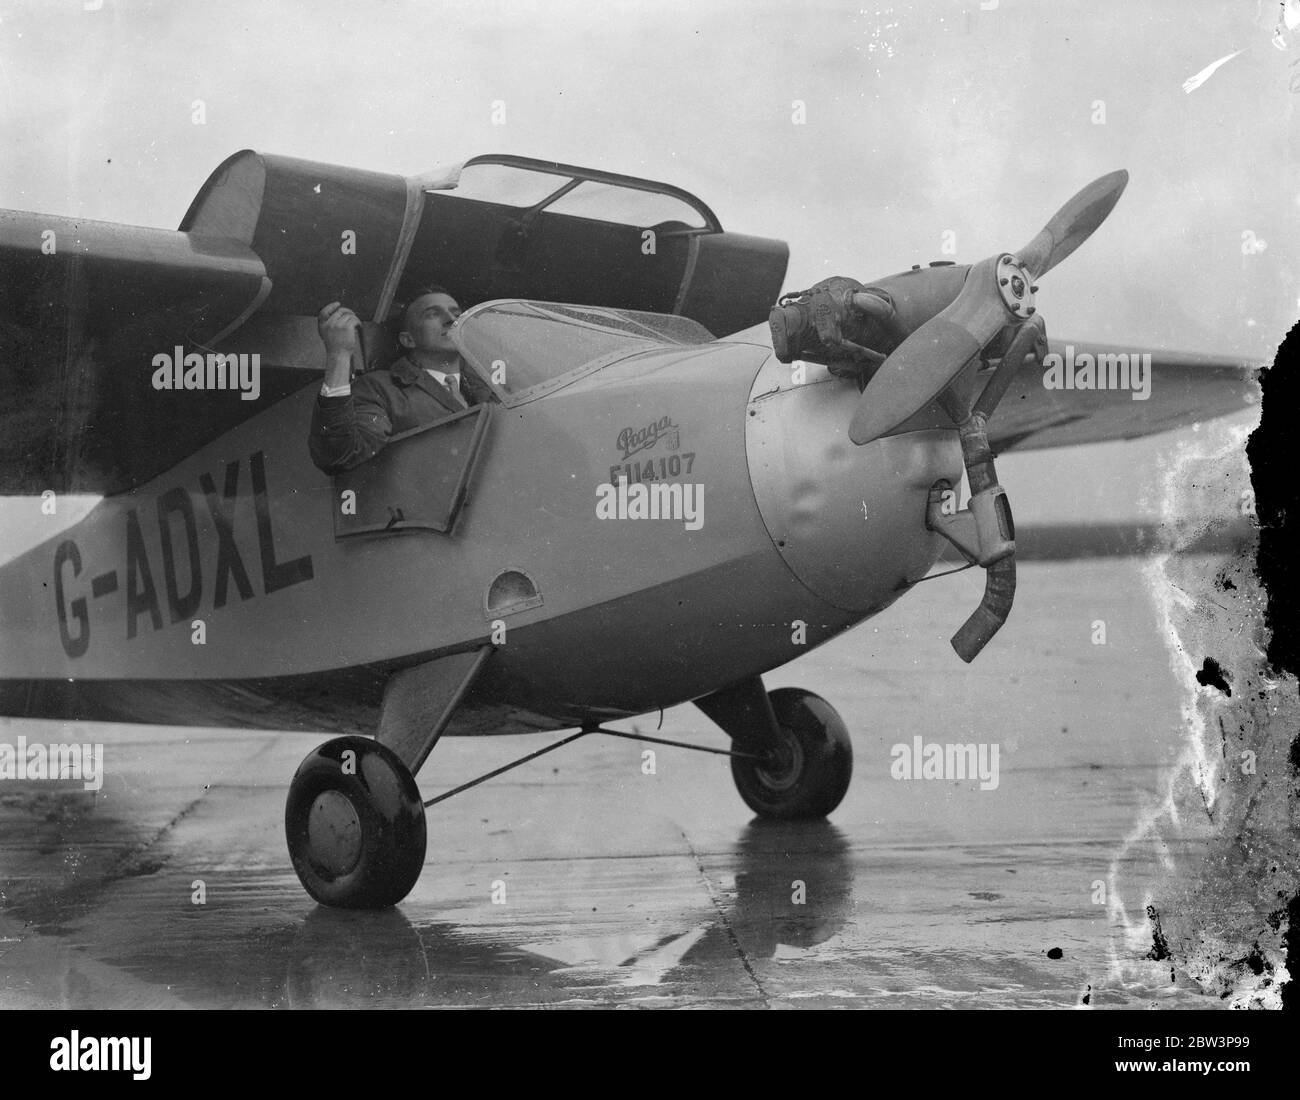 New sporting baby planes undergo first tests at Heston . The Hillson Prags , a new light sporting two seater designed to meet the requirements of wide sporting circles regarding low selling prices and servce expenses , underwent its first tests at Heston Aerodrome . the machine , a light hig wing monoplane , and side by side cabin seating for two people . The wing , which is fixed on the fueslage by four bolts entirely covers the cockpit , but can be detached by a crew of two within five minutes , rendering complicated wing folding unnecessary . The new baby plane powered by a Praga ' B ' 40 h Stock Photo